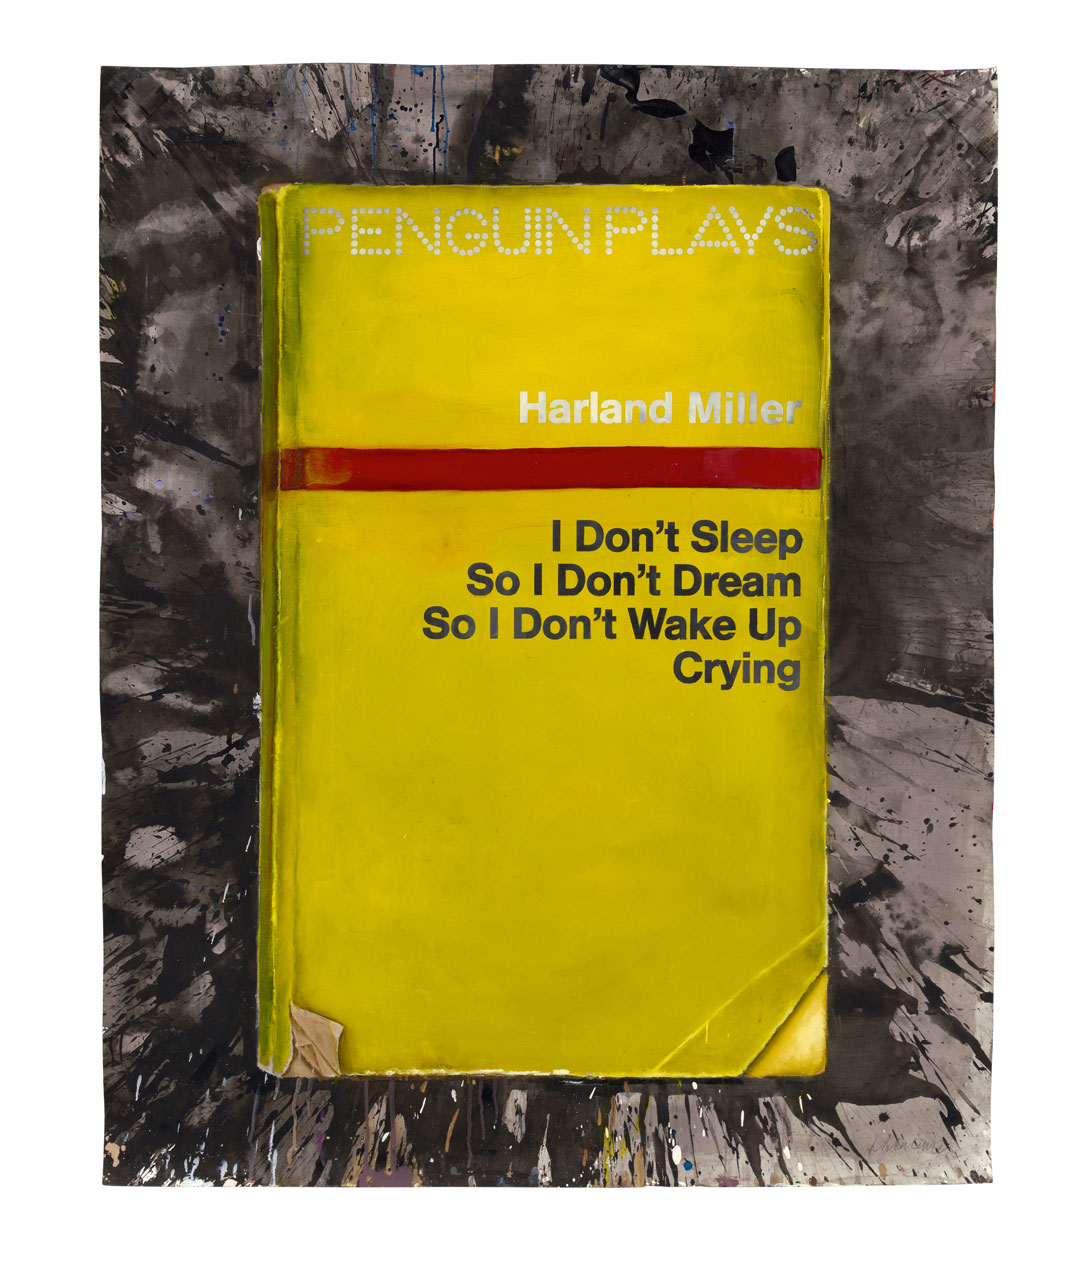 I Don’t Sleep So I Don’t Dream So I Don’t Wake Up Crying (2013) by Harland Miller